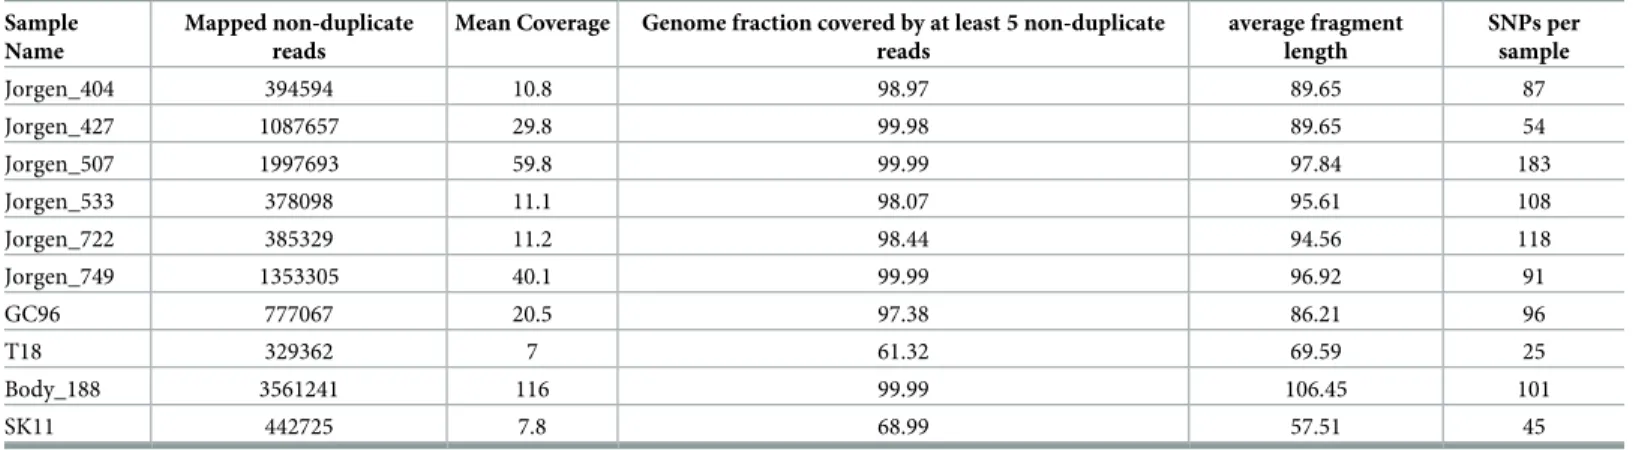 Table 1. Results of the genome-wide analysis for the samples with sufficient coverage.